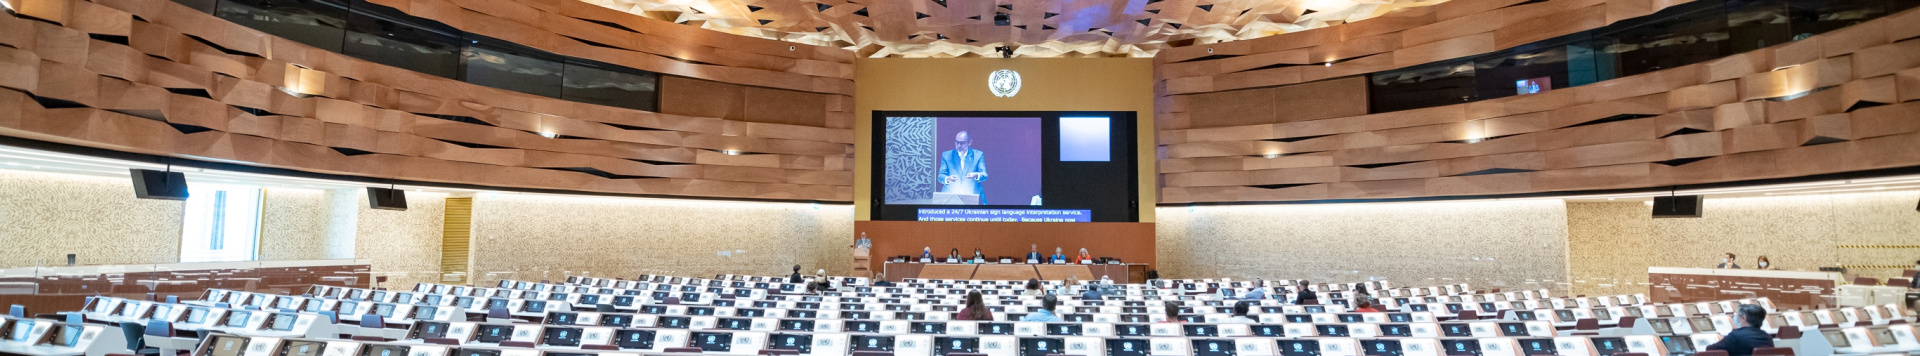 A very large screen projects a speaker behind the panel members in one of the UN conference rooms. 